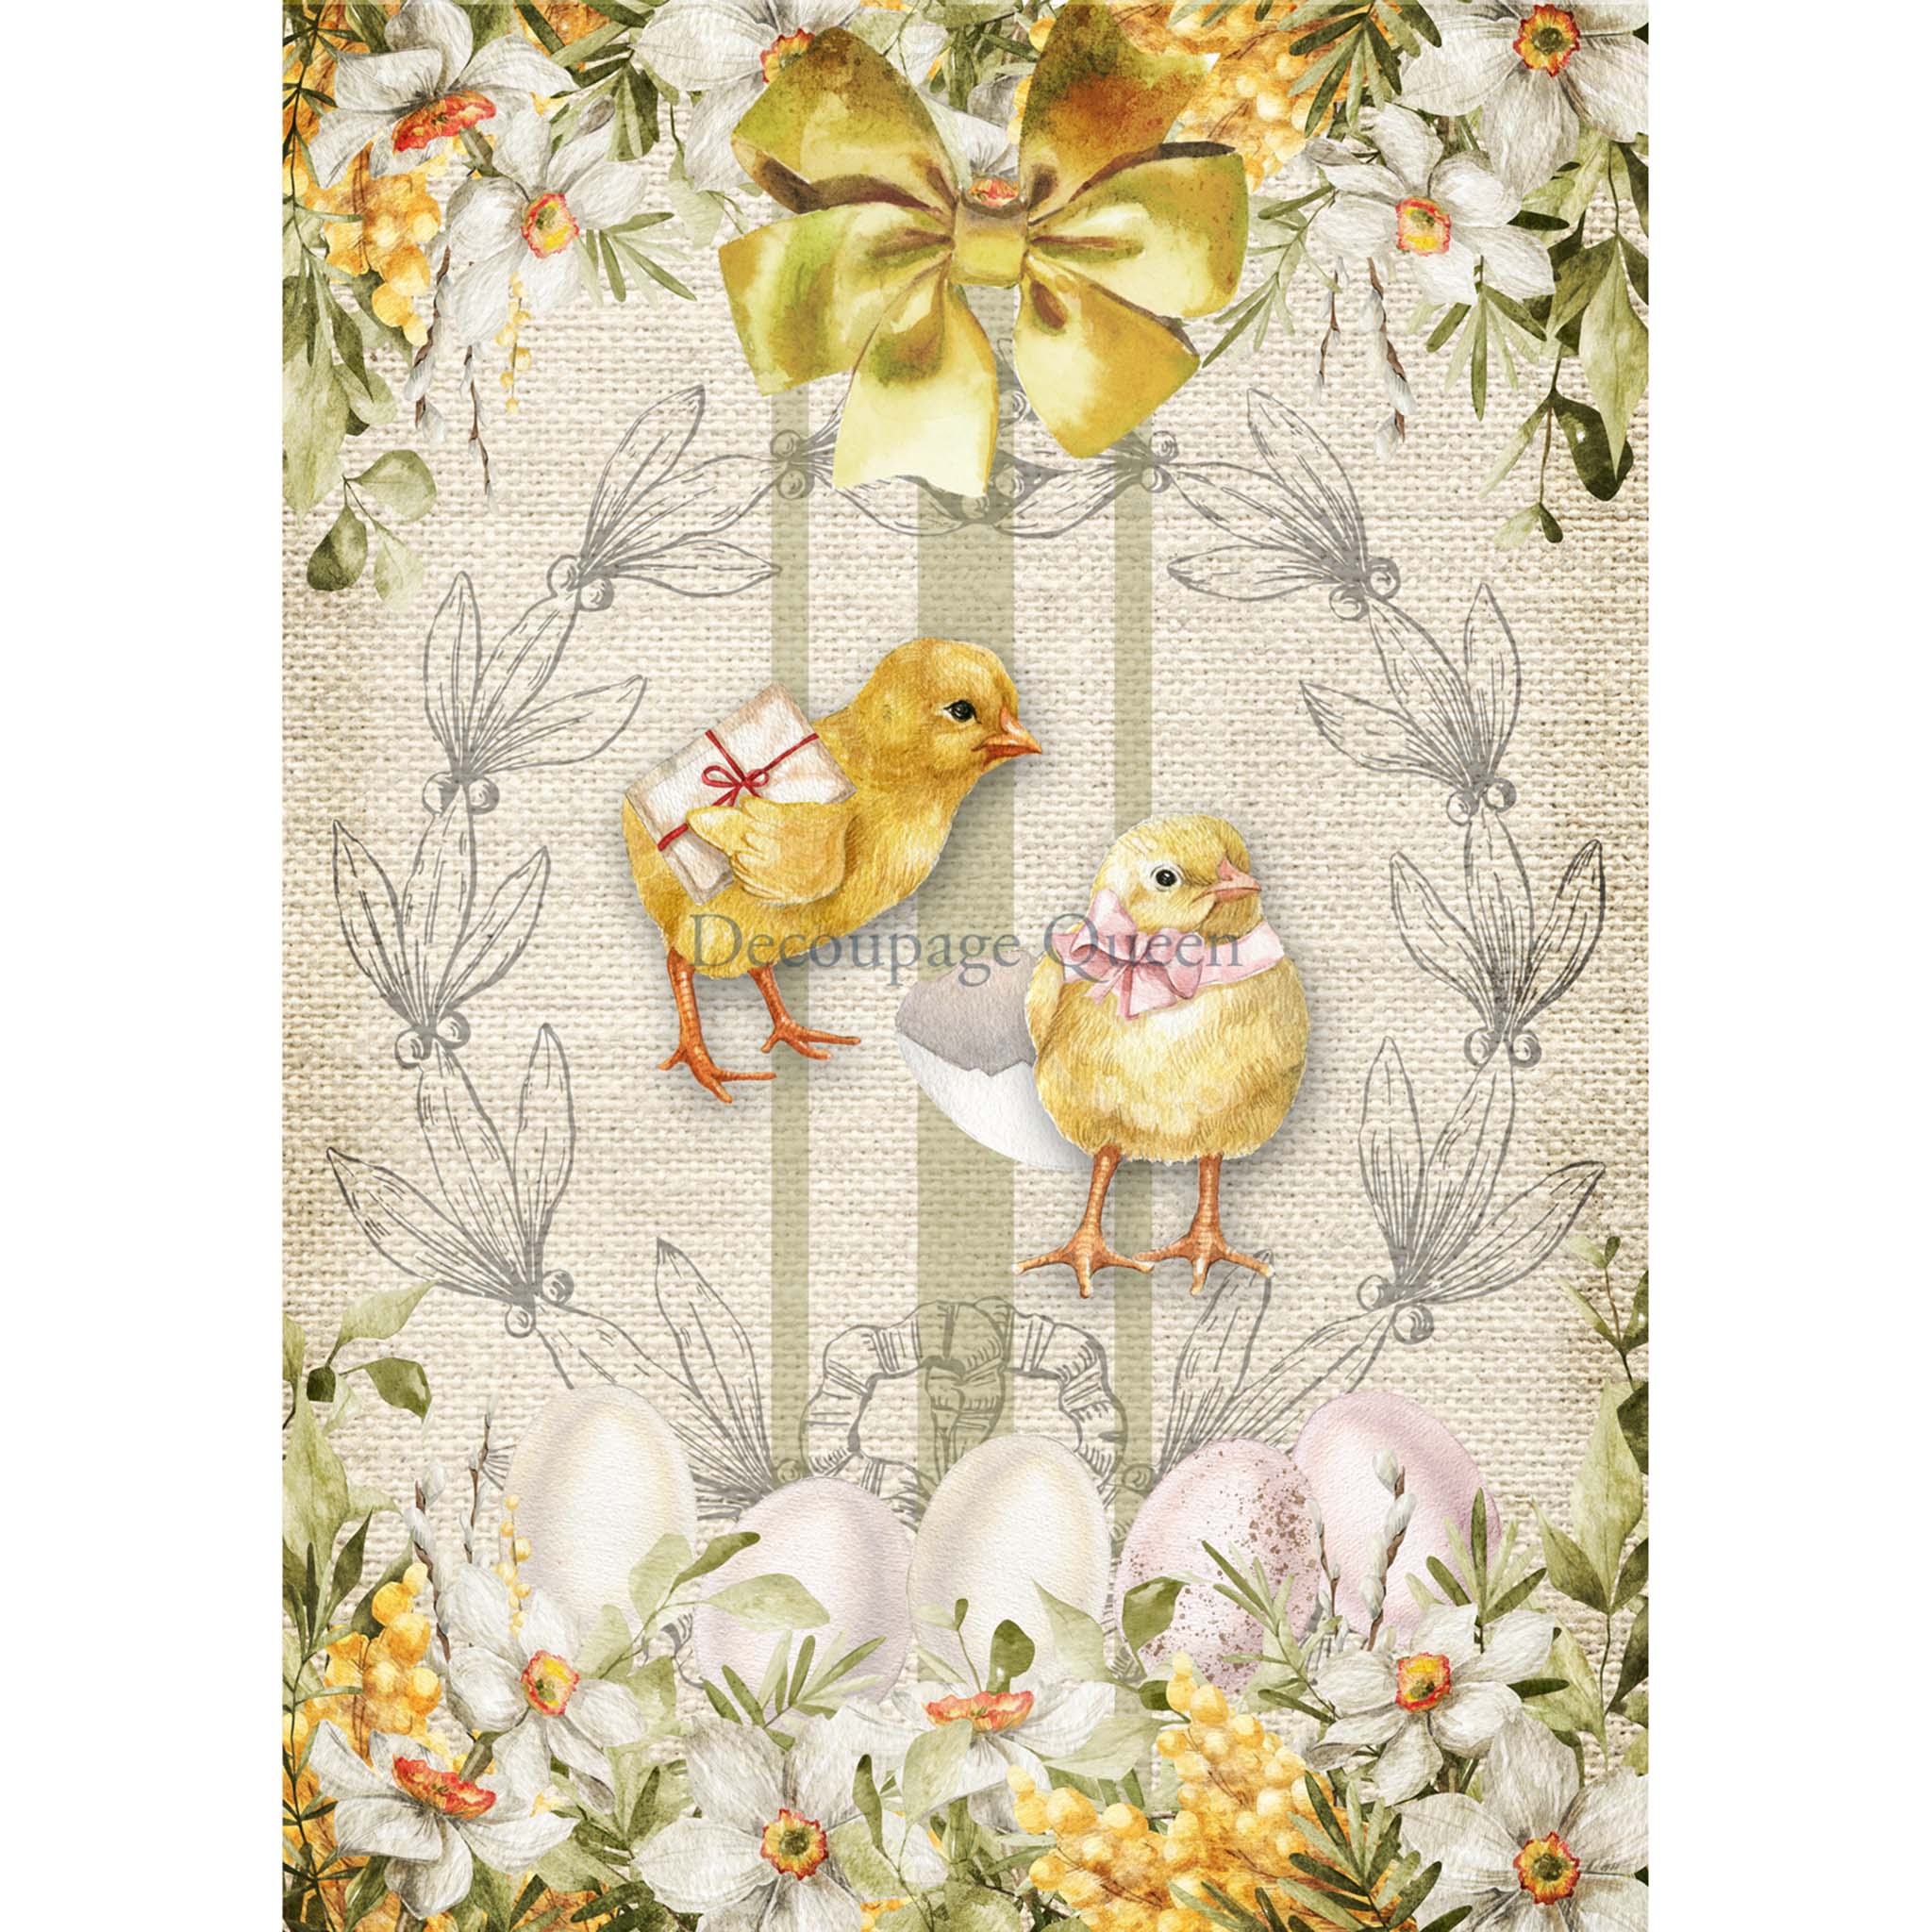 A4 rice paper design that features two adorable yellow chicks nestled amidst a floral backdrop on a rustic grain sack. White borders are on the sides/